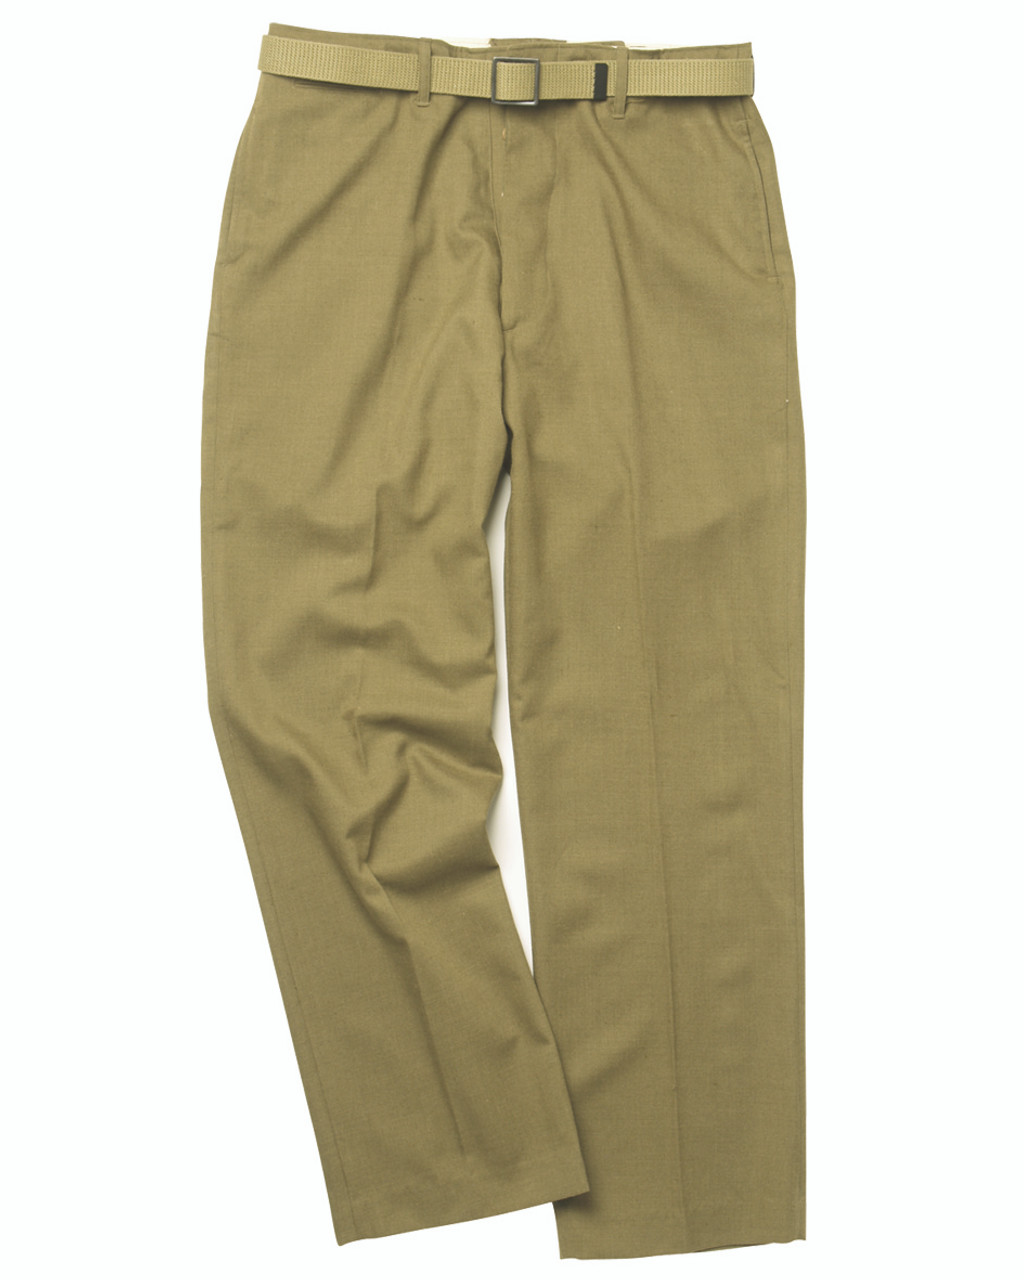 M-1951 Trousers Wool M-51 Field Pants | Army Navy Warehouse